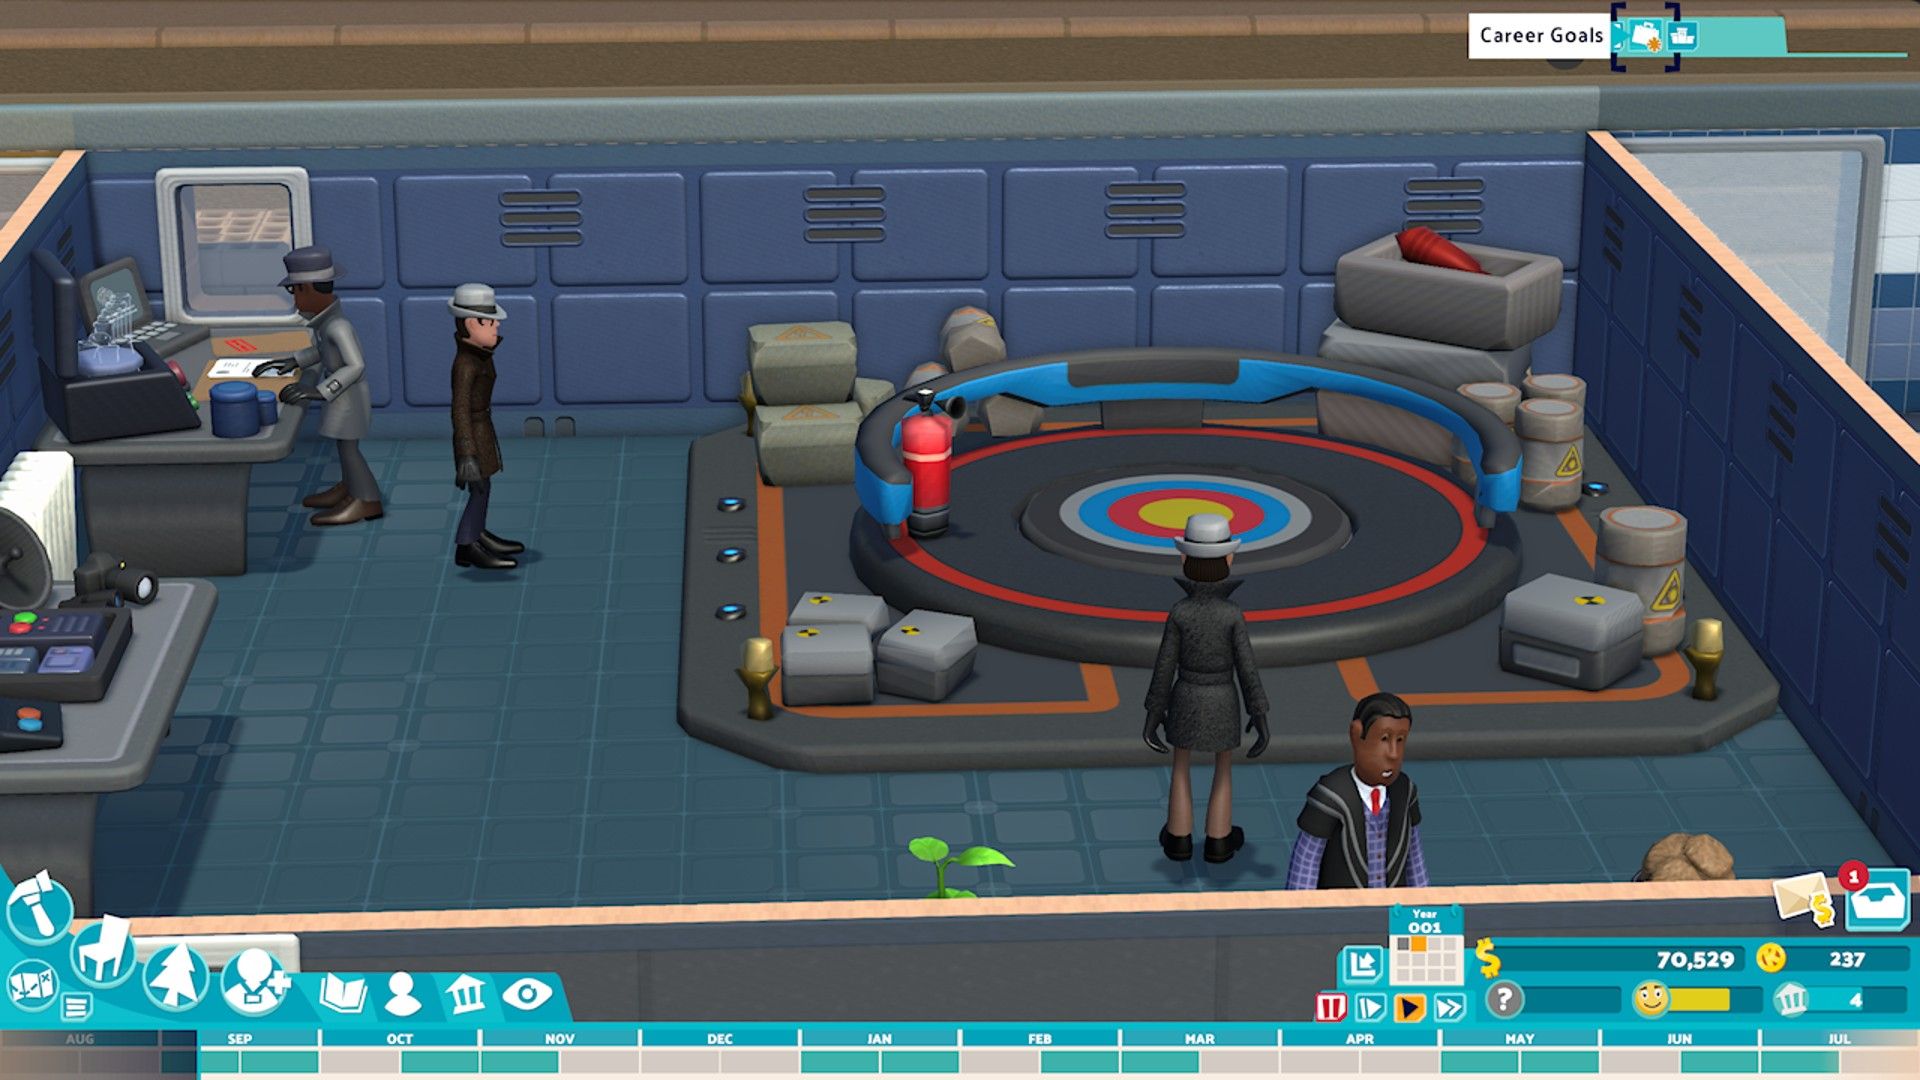 Spy students during a lesson in the gadgets room in Two Point Campus